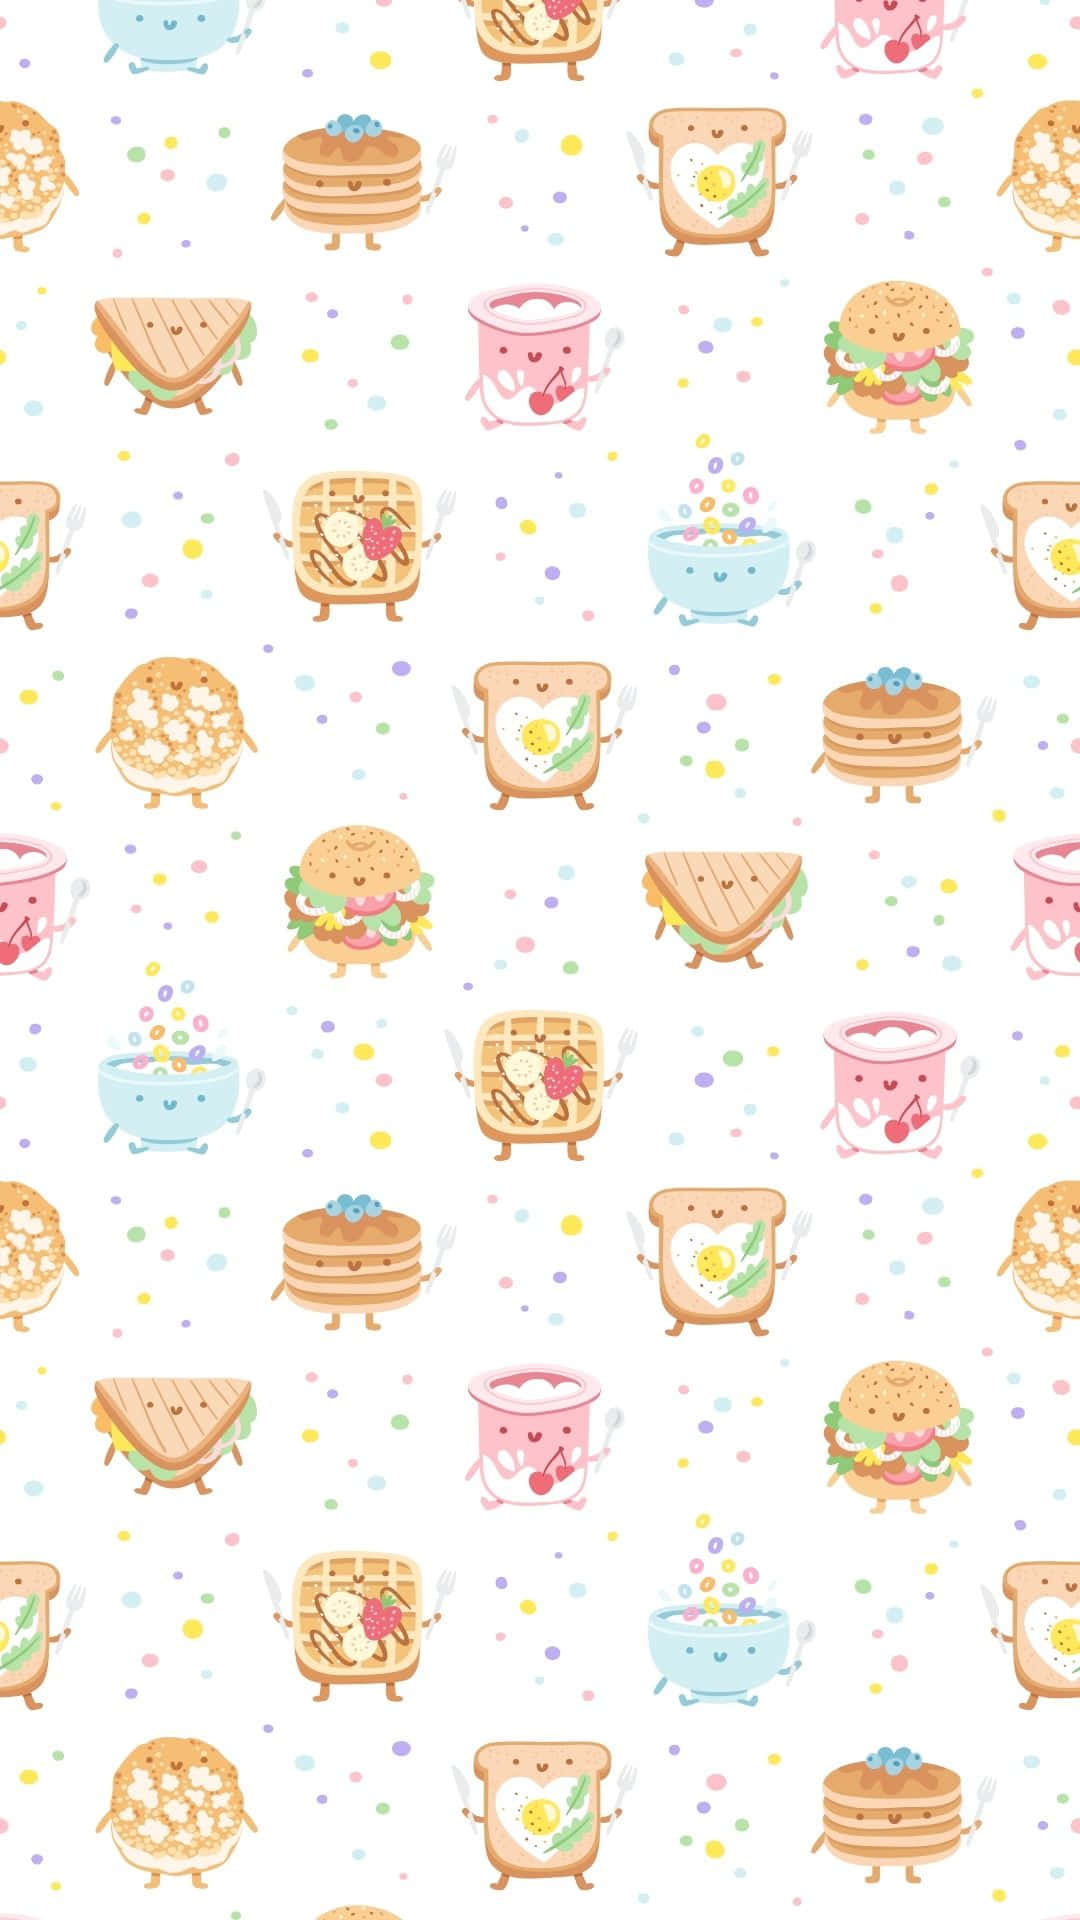 "A deliciously cute treat for your iPhone!" Wallpaper